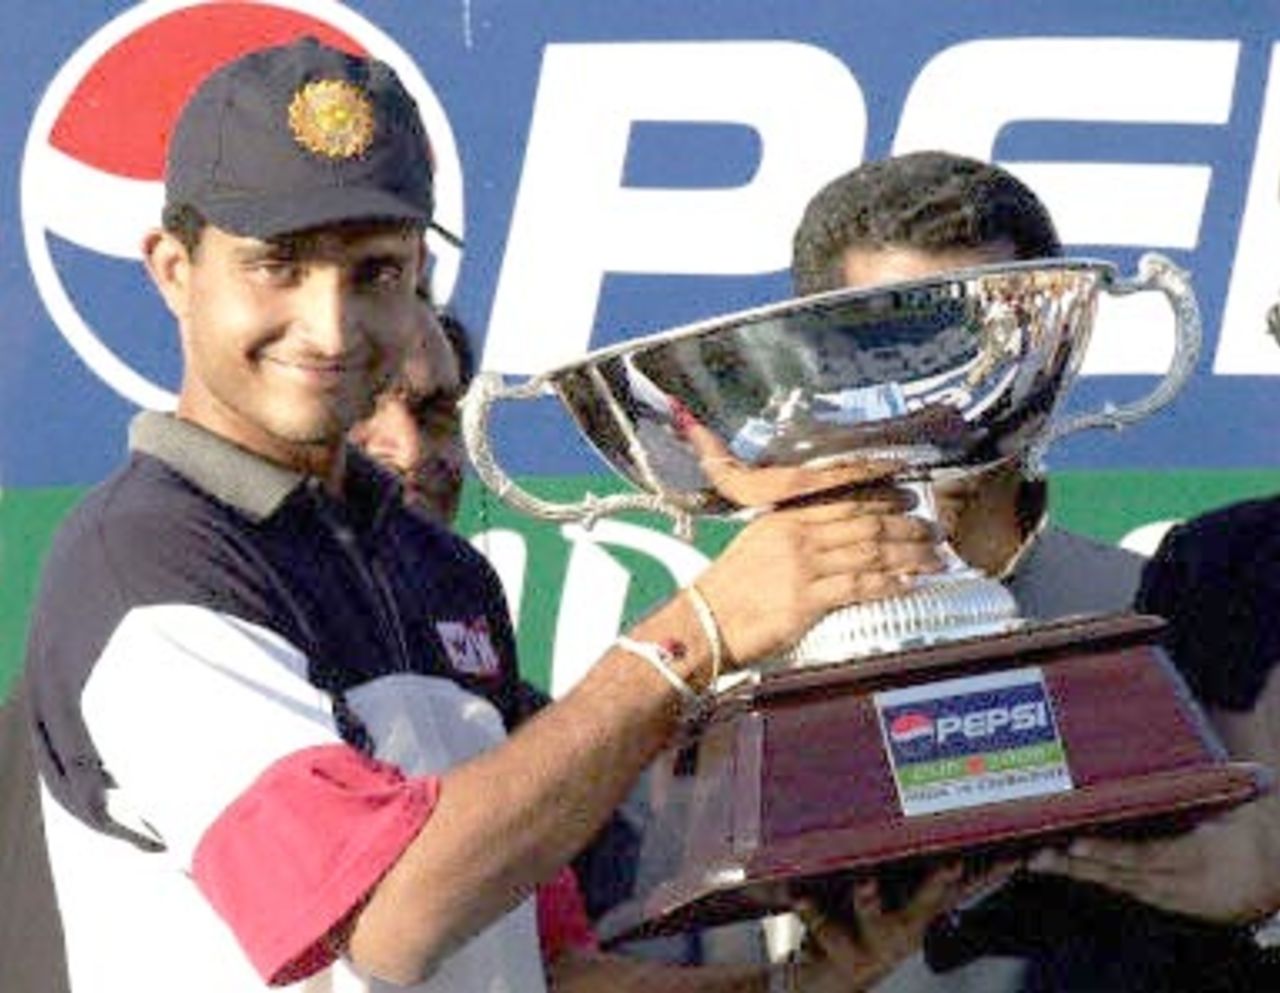 Indian skipper Sourav Ganguly shows the winner's trophy after India won the final match and the series against Zimbabwe, 14 December 2000 at the Municipal ground in Rajkot. Ganguly was banned from the match for on-field behavior in the last match.